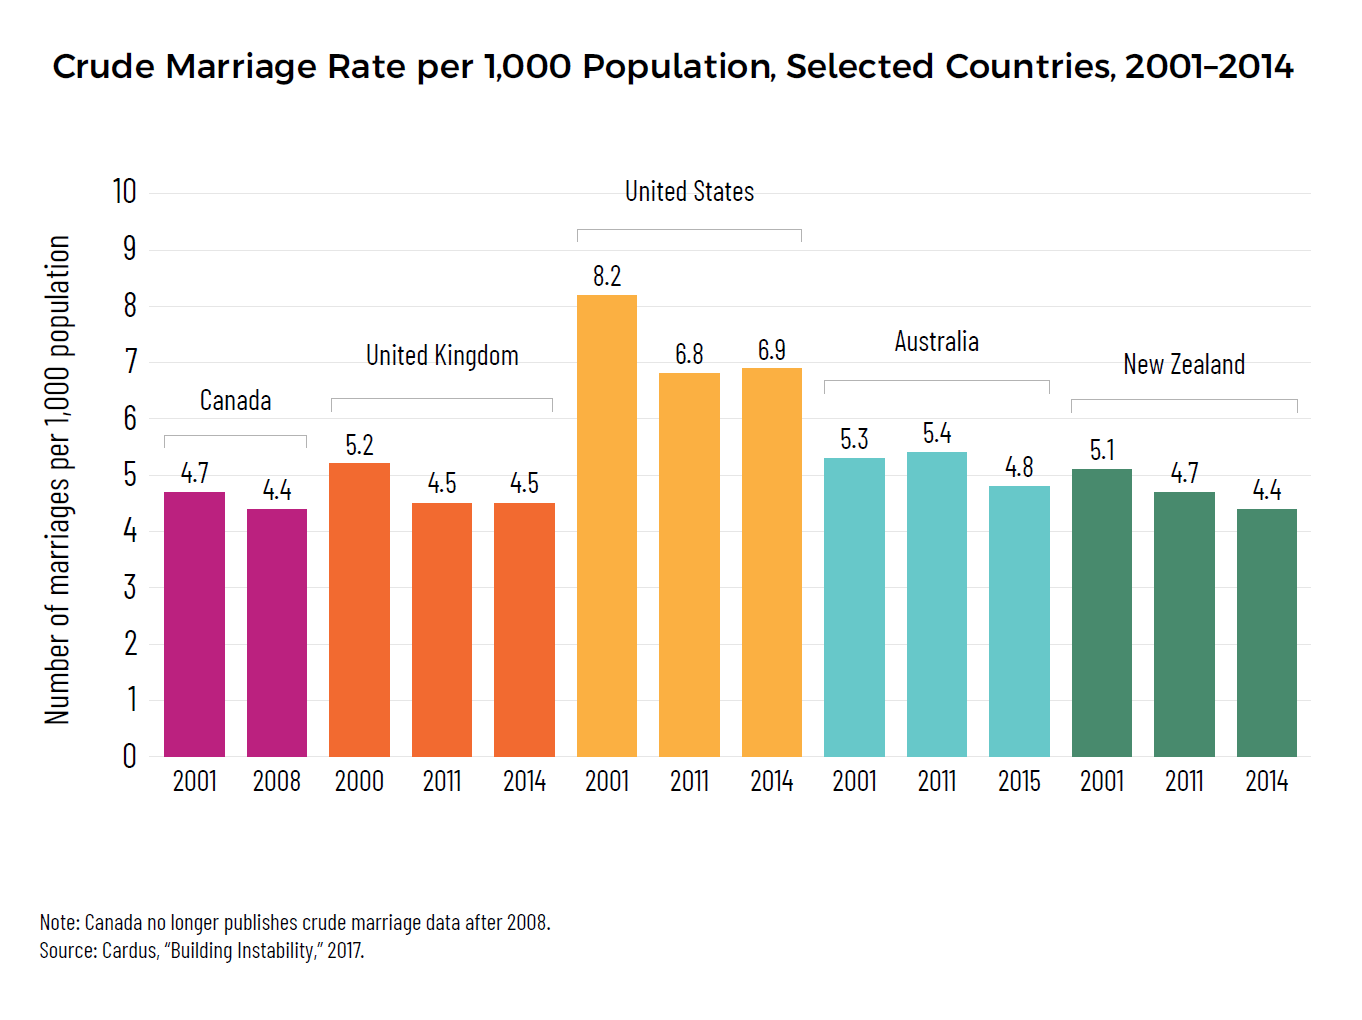 Crude Marriage Rate per 1,000 Population, Selected Countries, 2001-2014